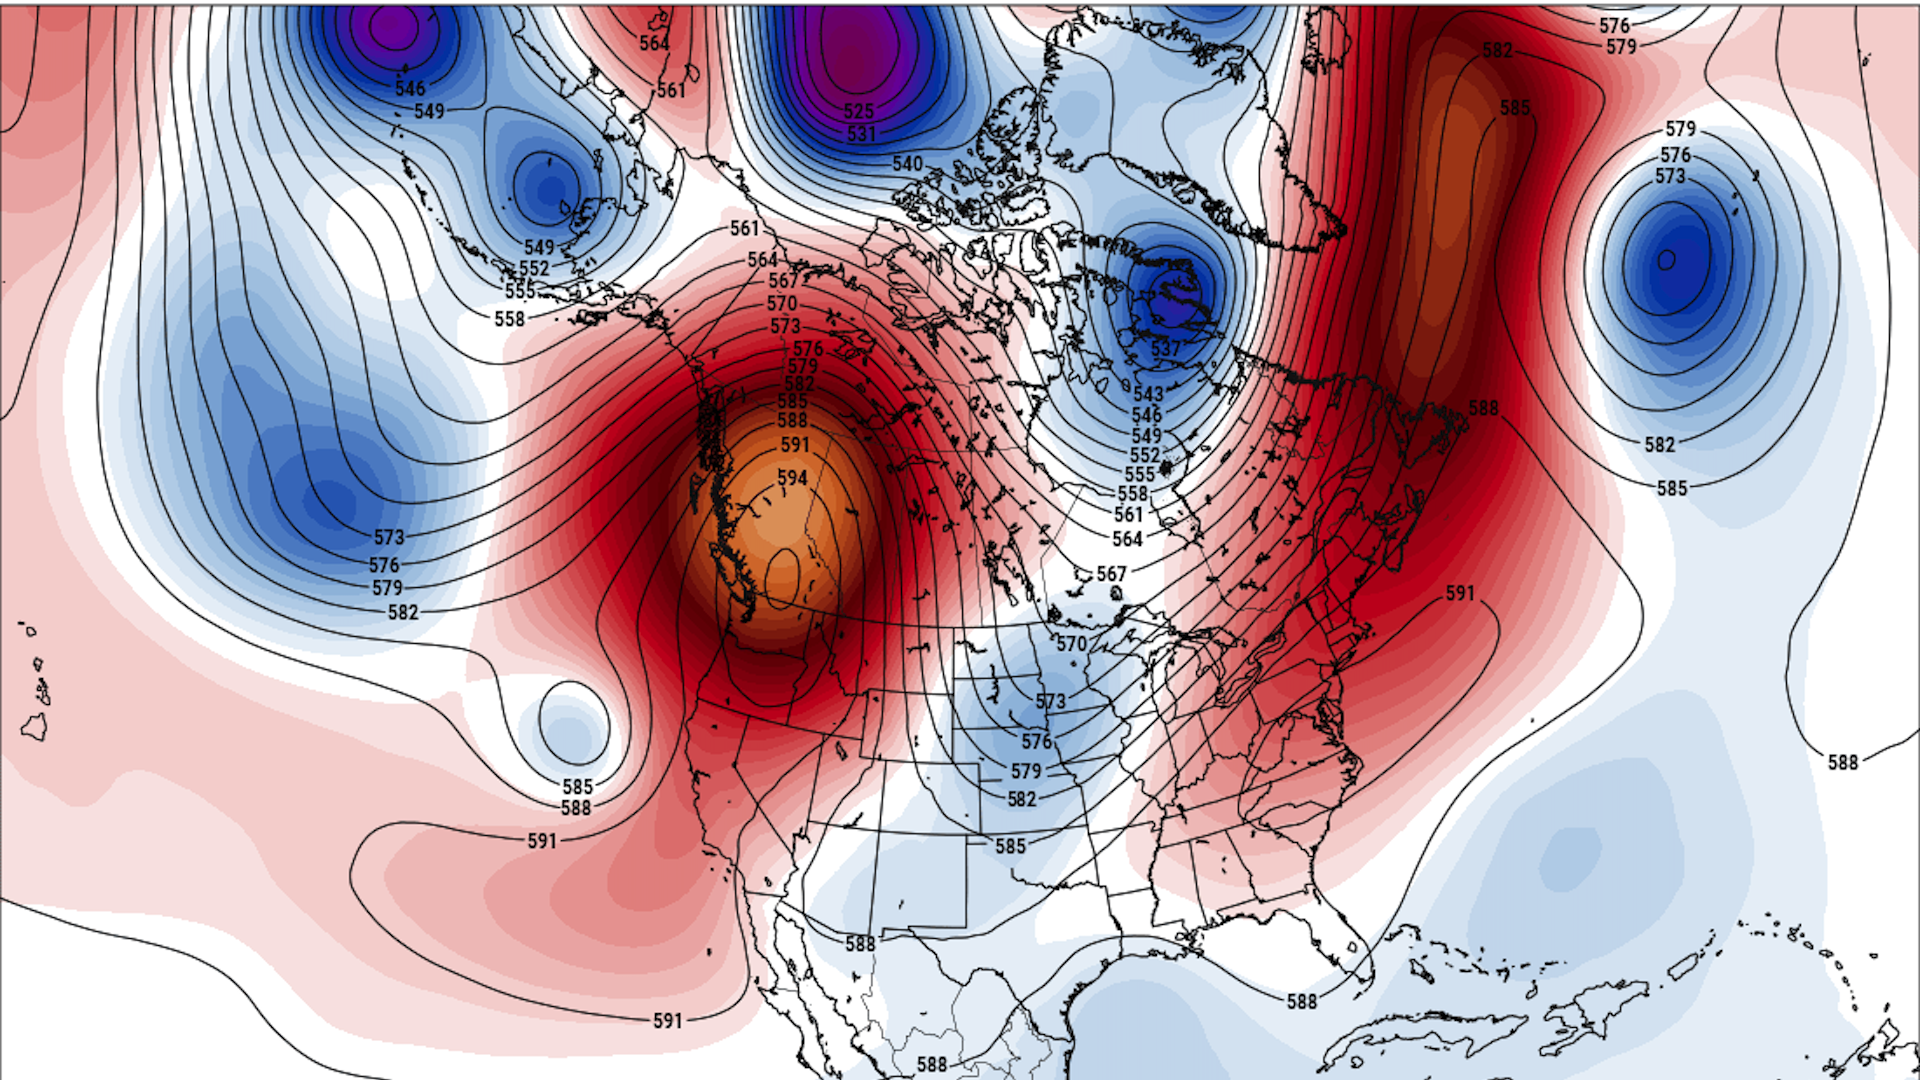 Computer model projection showing an unusually intense heat dome over the Pacific Northwest, marked in crimson.